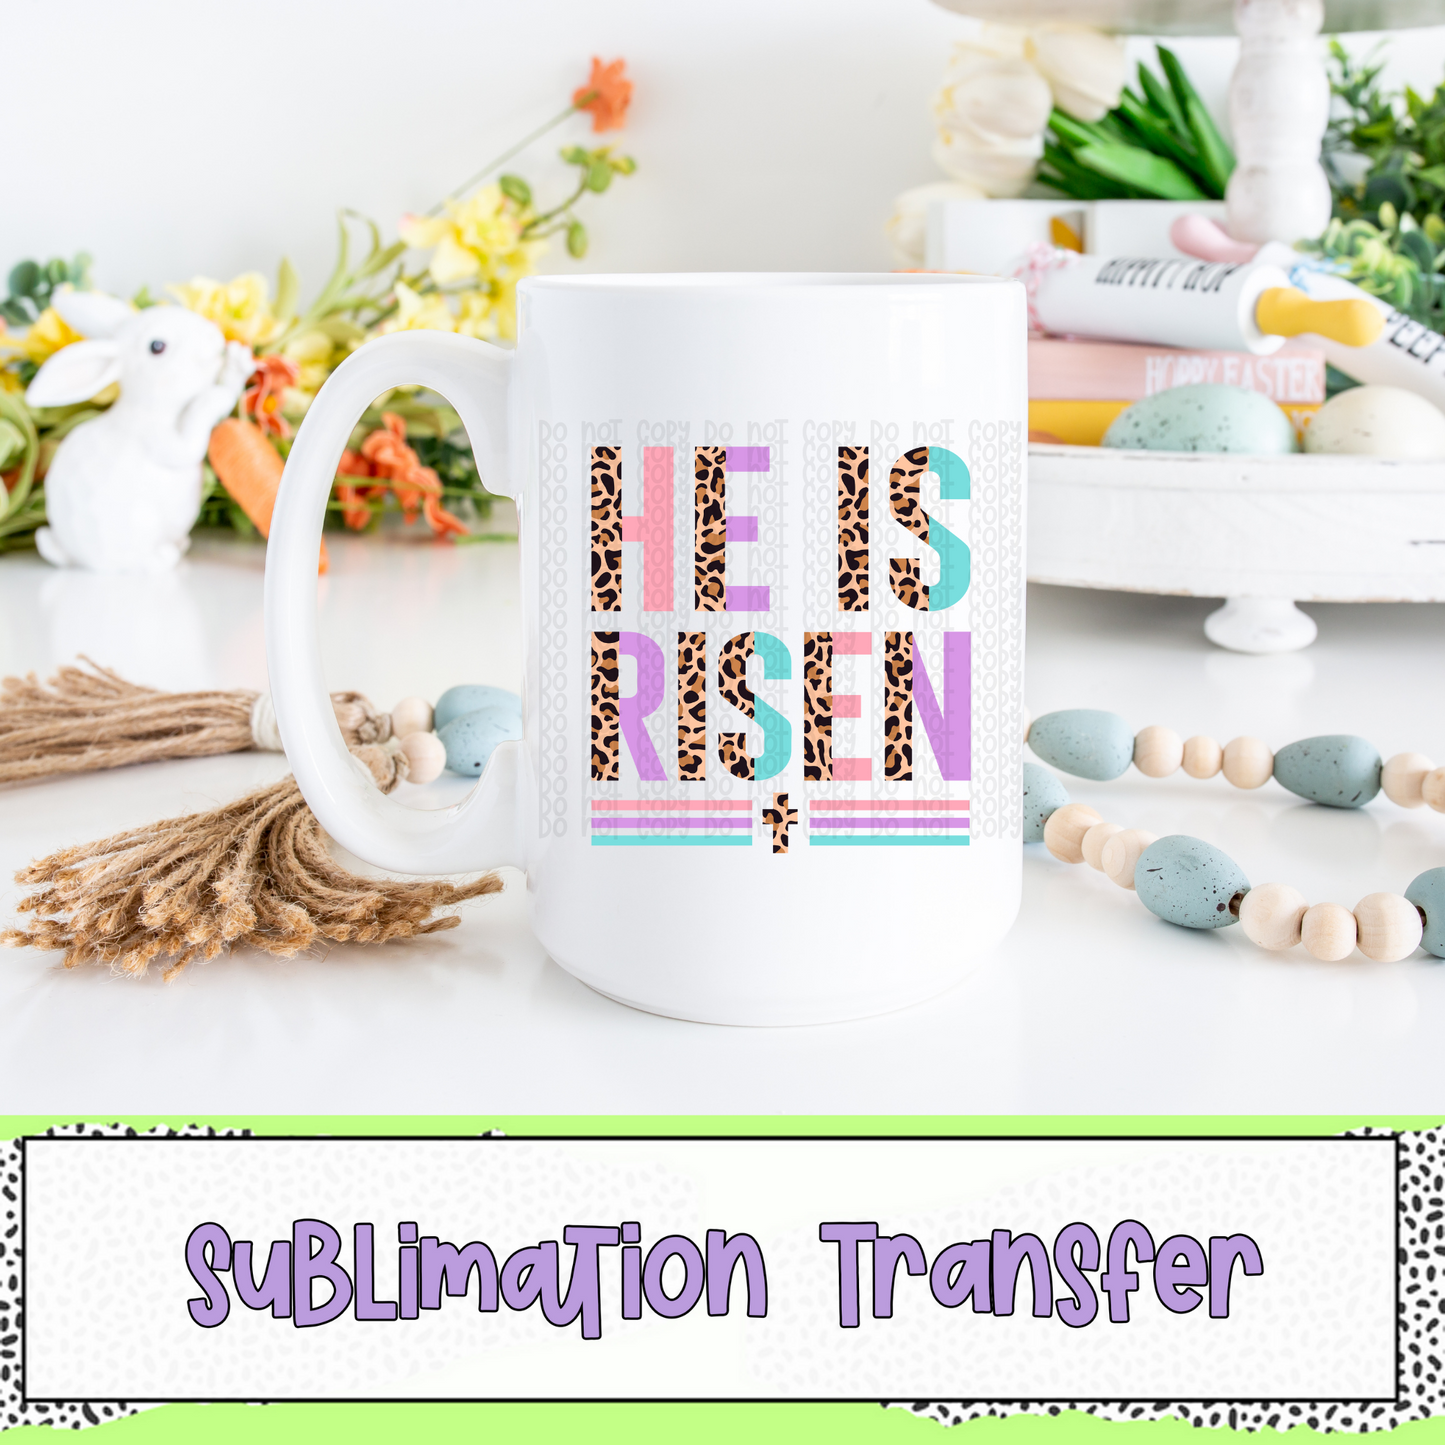 He is Risen - SUBLIMATION TRANSFER